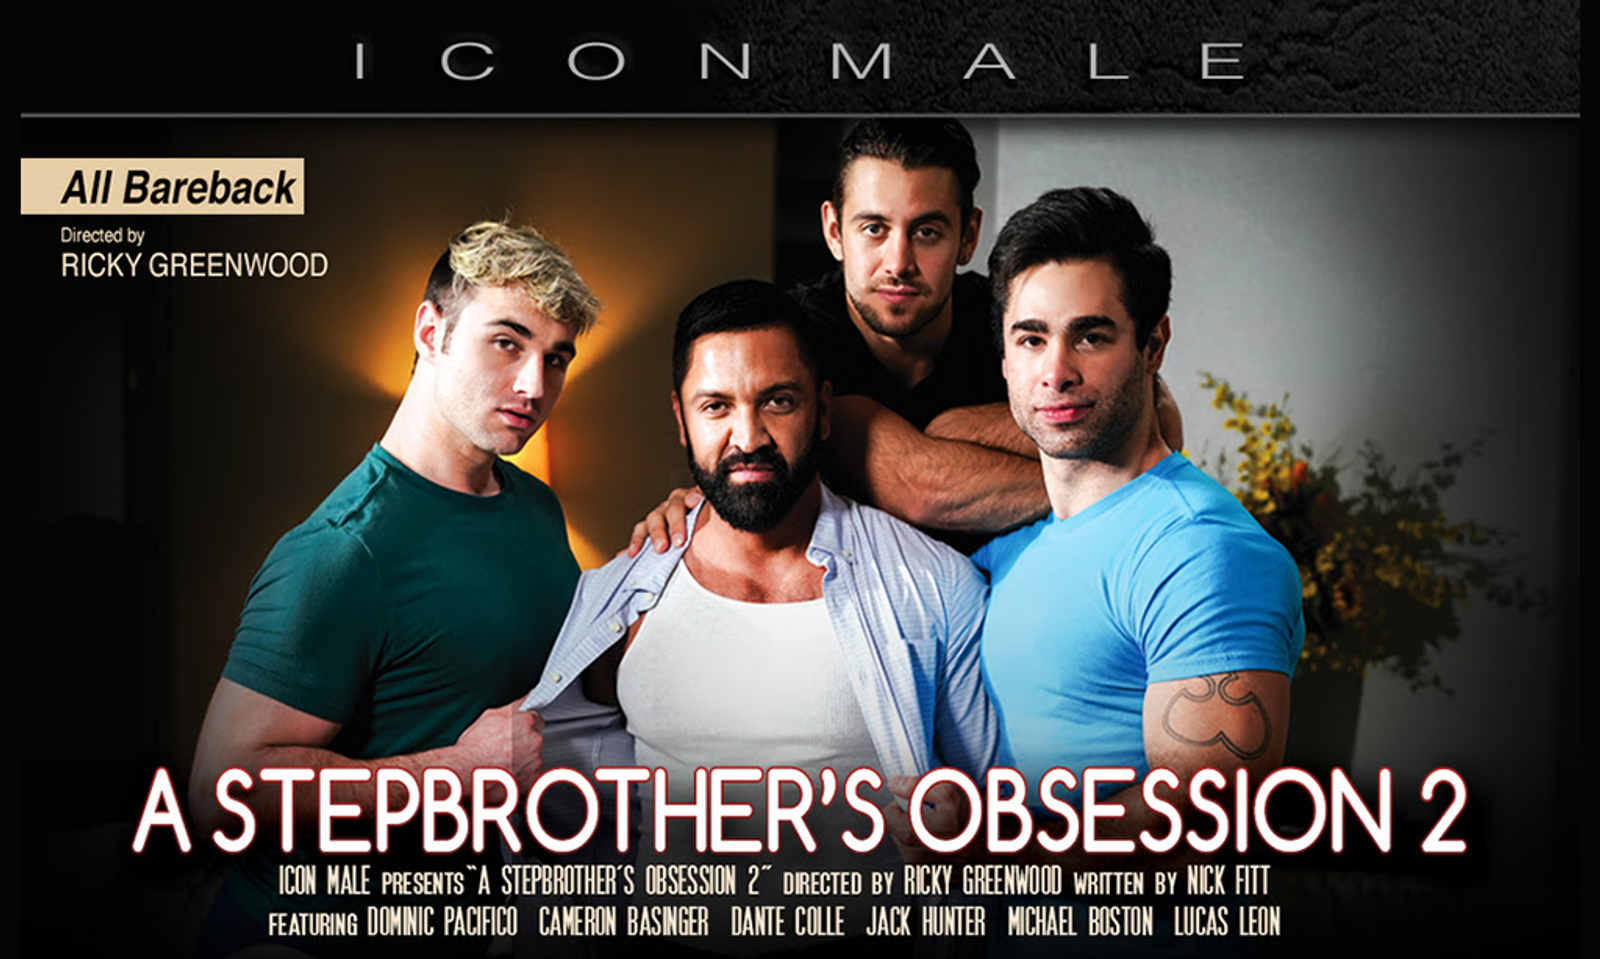 It's All in the Taboo Family in ‘A Stepbrother’s Obsession 2’